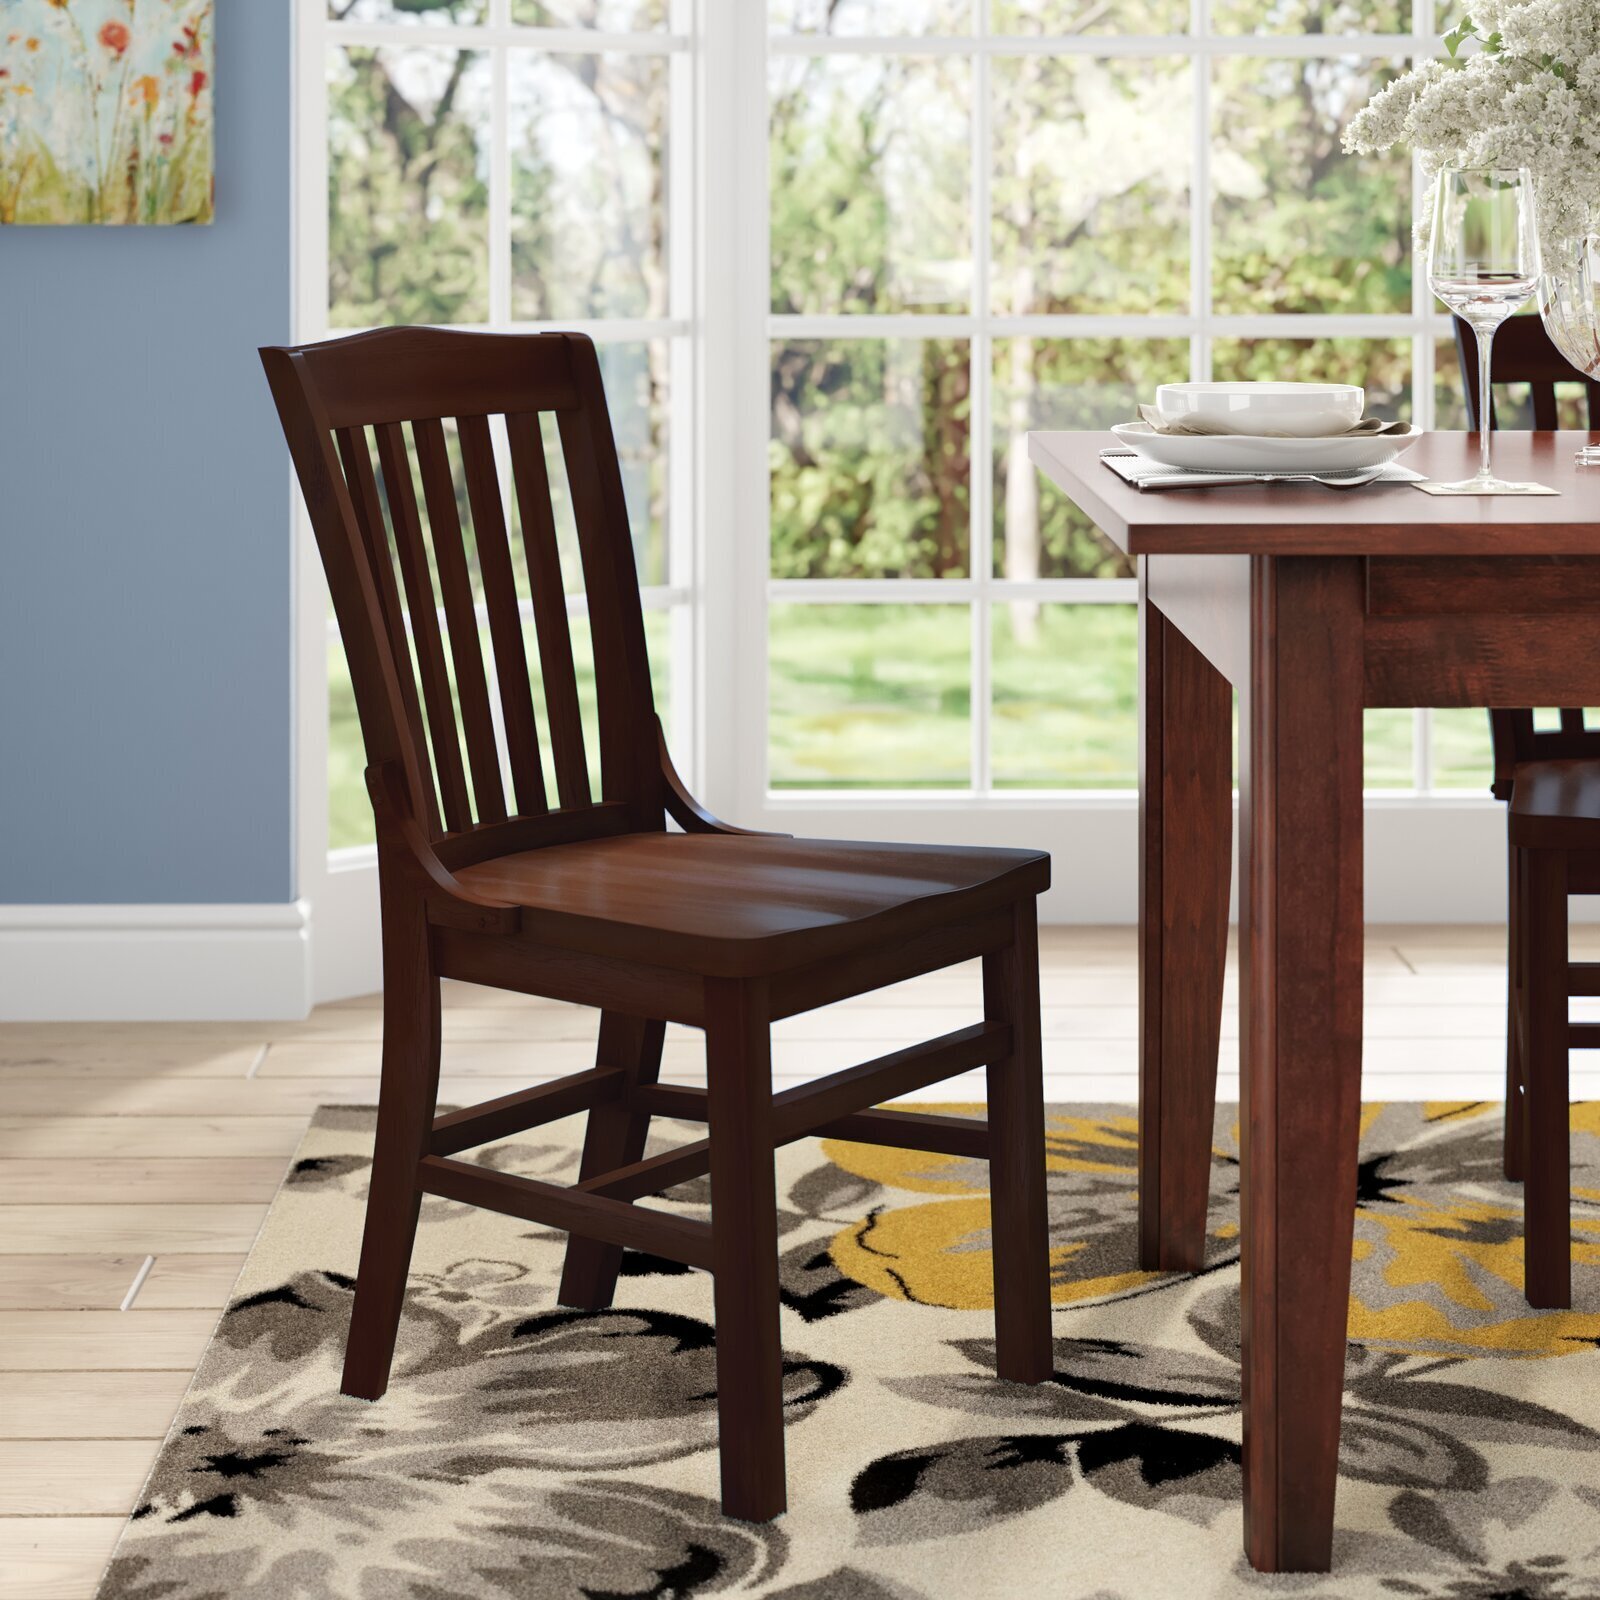 Wooden heavy duty dining chair